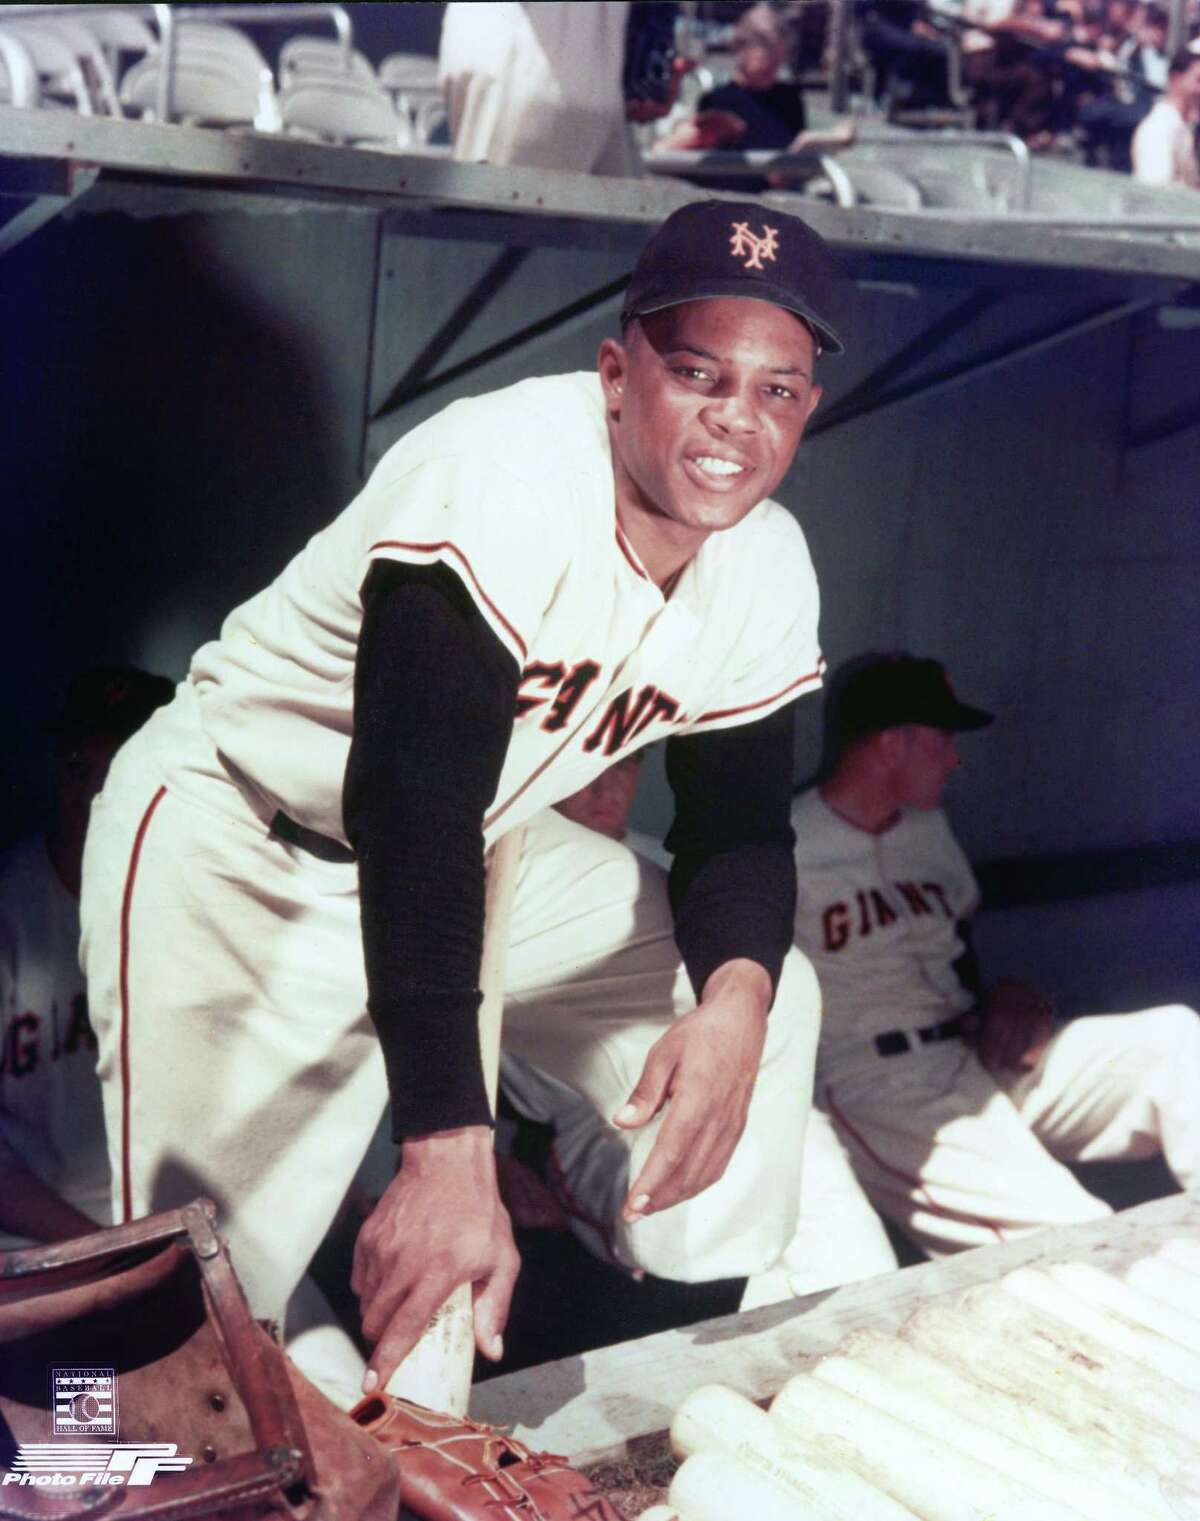 Willie Mays of the New York Giants poses for a portrait during a season game. Willie Mays played for the New York Giants from 1951-1957.